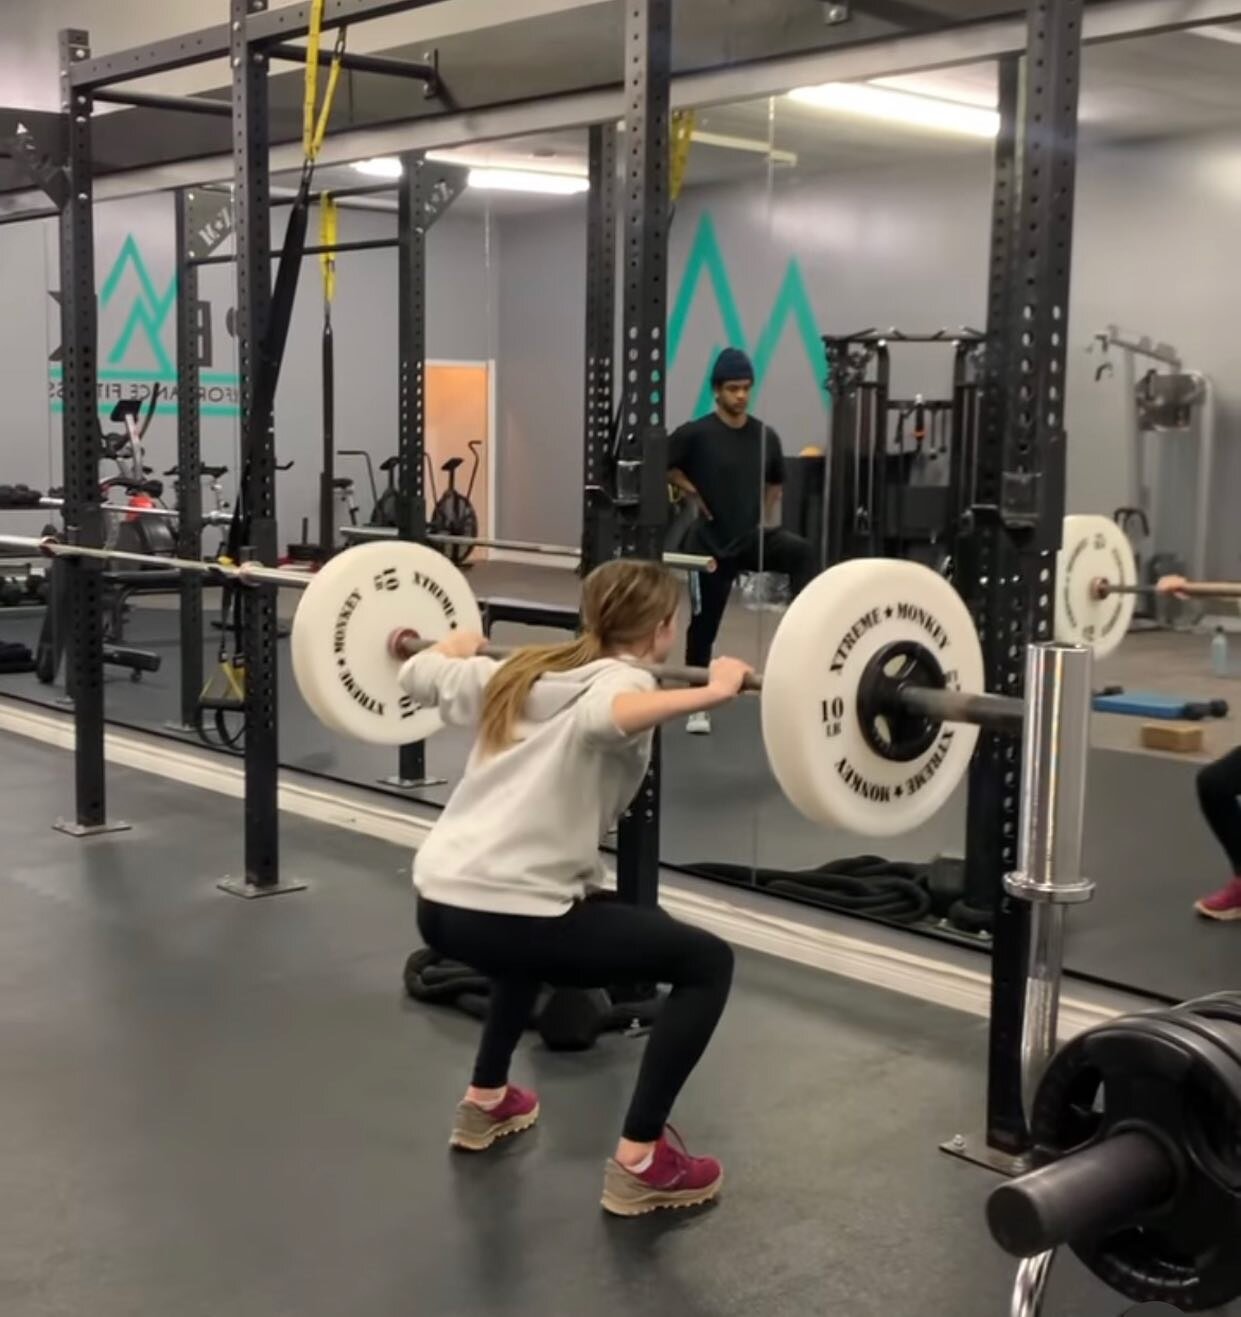 Winter programming continues&hellip;consistency in the gym helps our athletes move well, prevent injuries and  improve strength that will carryover to all activities. Keep up the great effort! 💪

@thormotorsford @kawarthavoyageur @stimulusperformanc